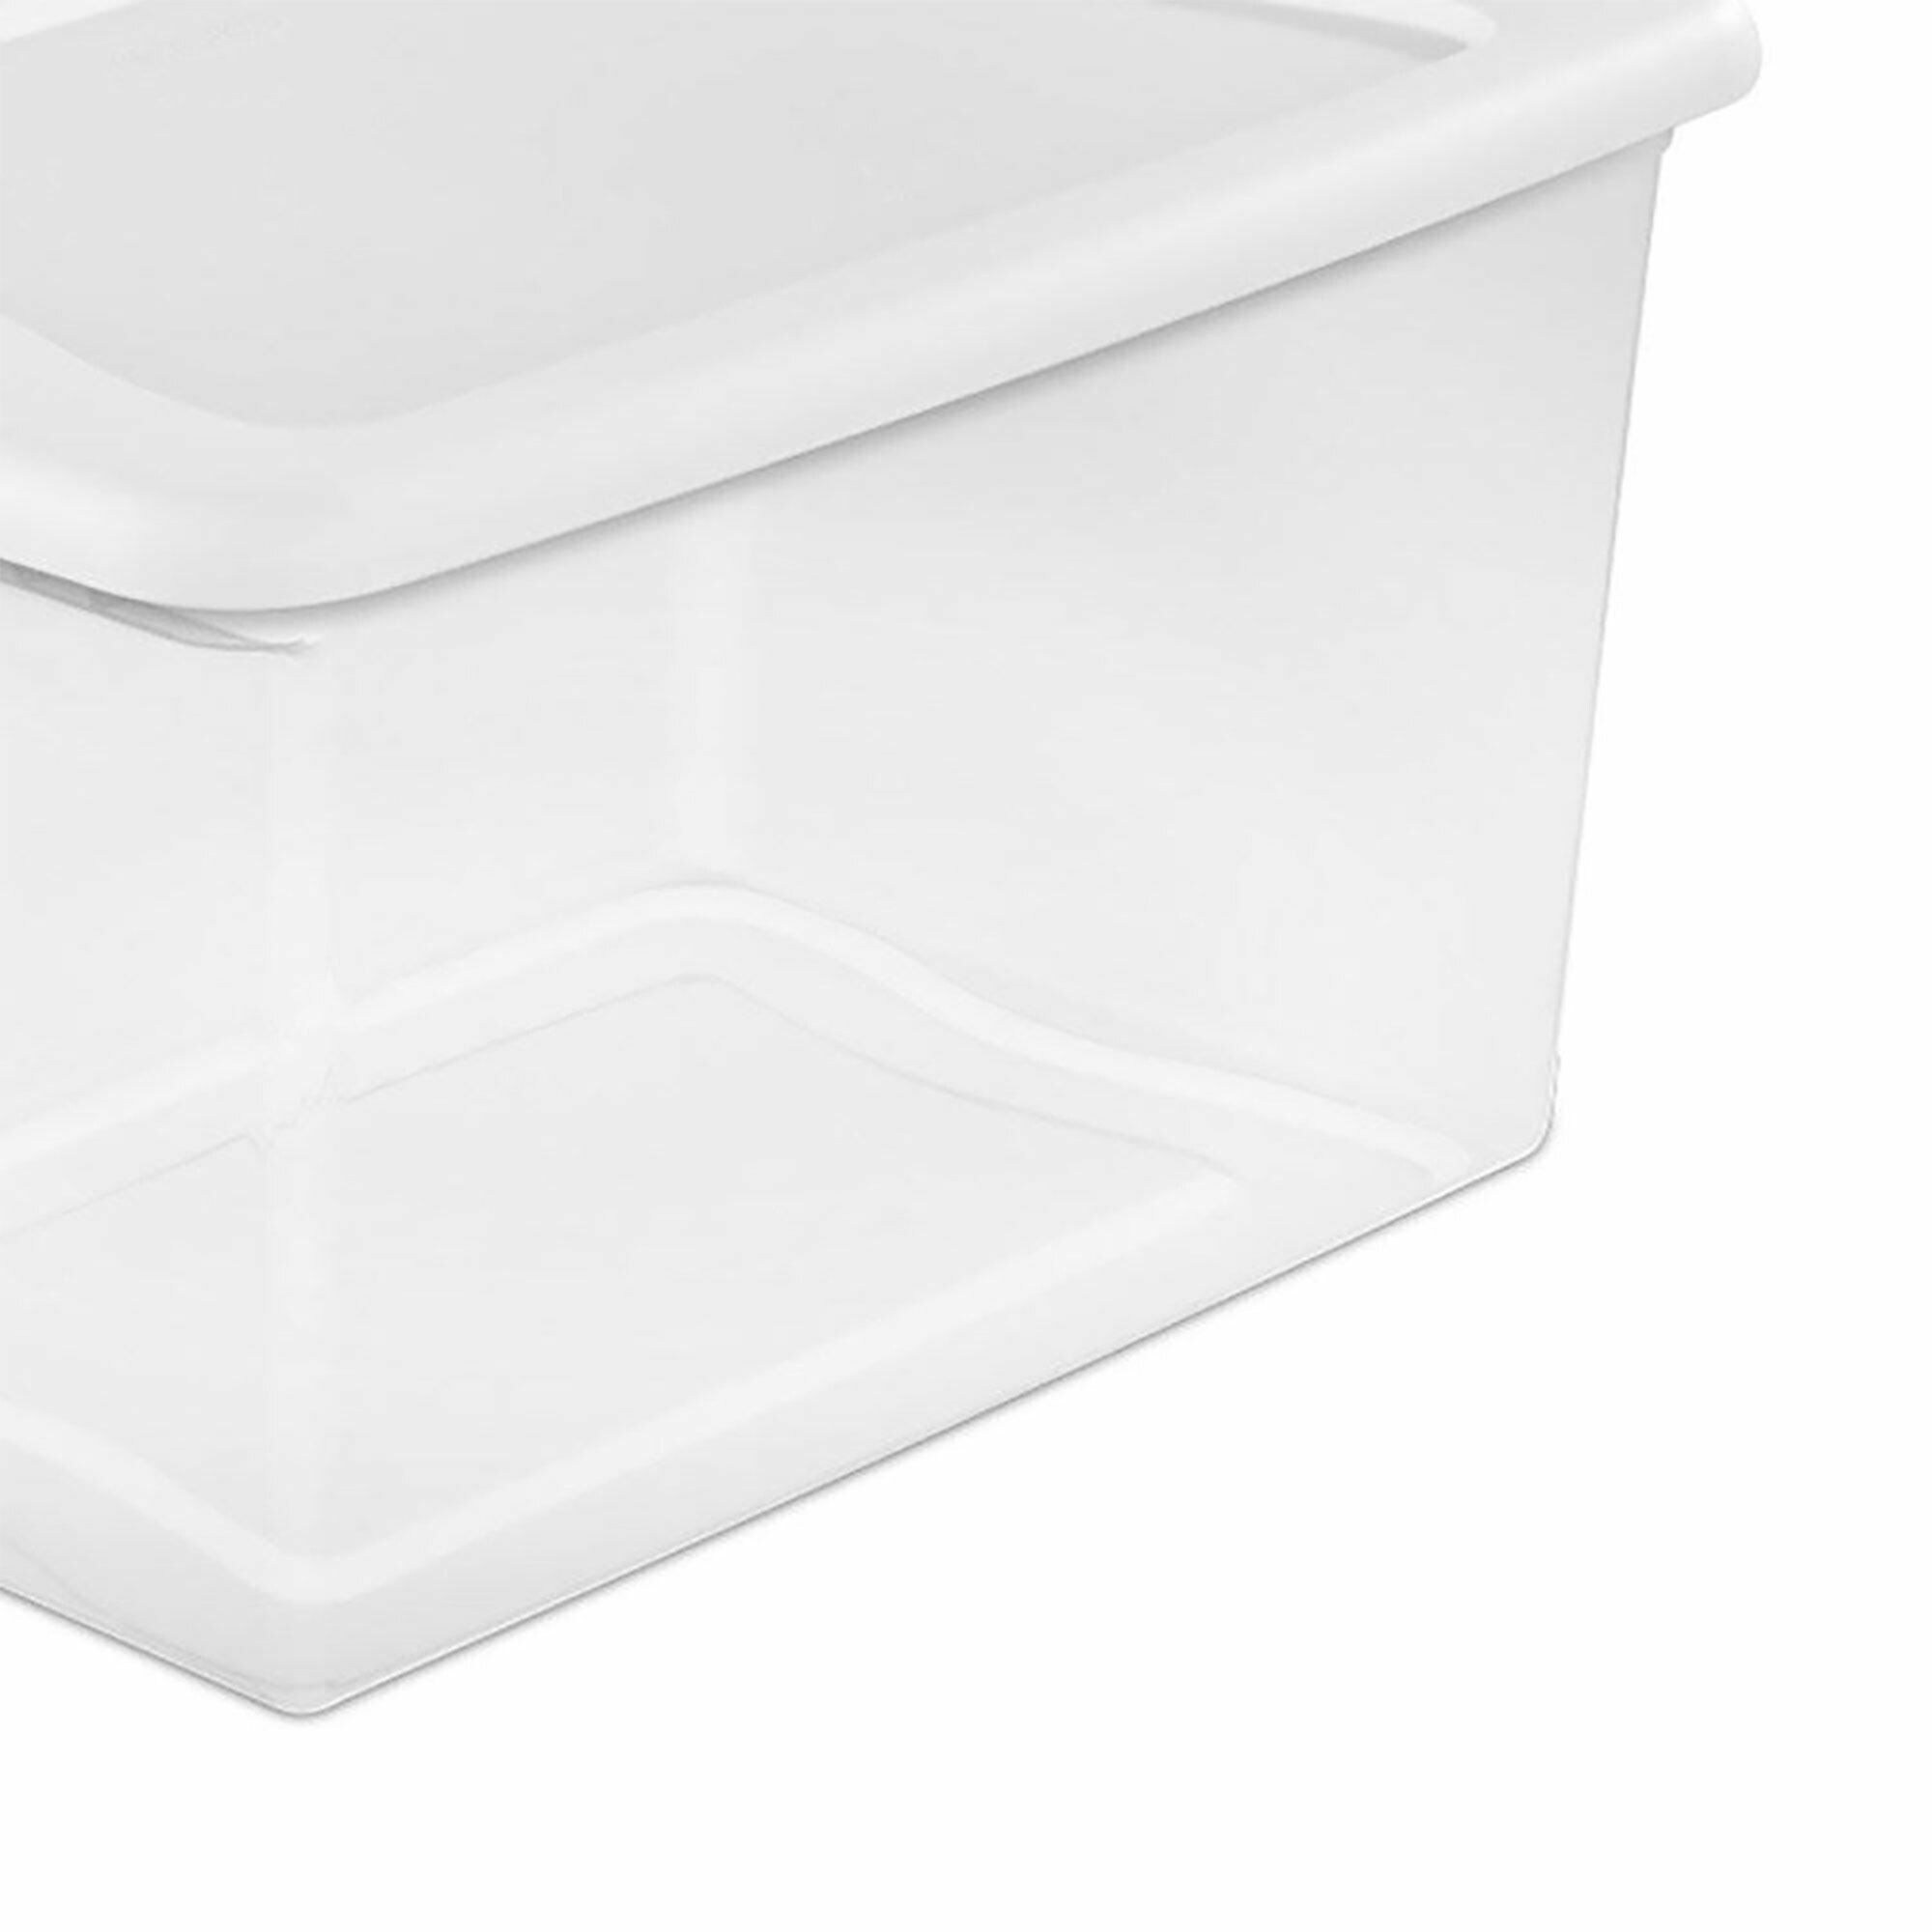 Sterilite Mini Clip Box, Stackable Small Storage Bin with Latching Lid, 6  Pack, 6pk - Foods Co.